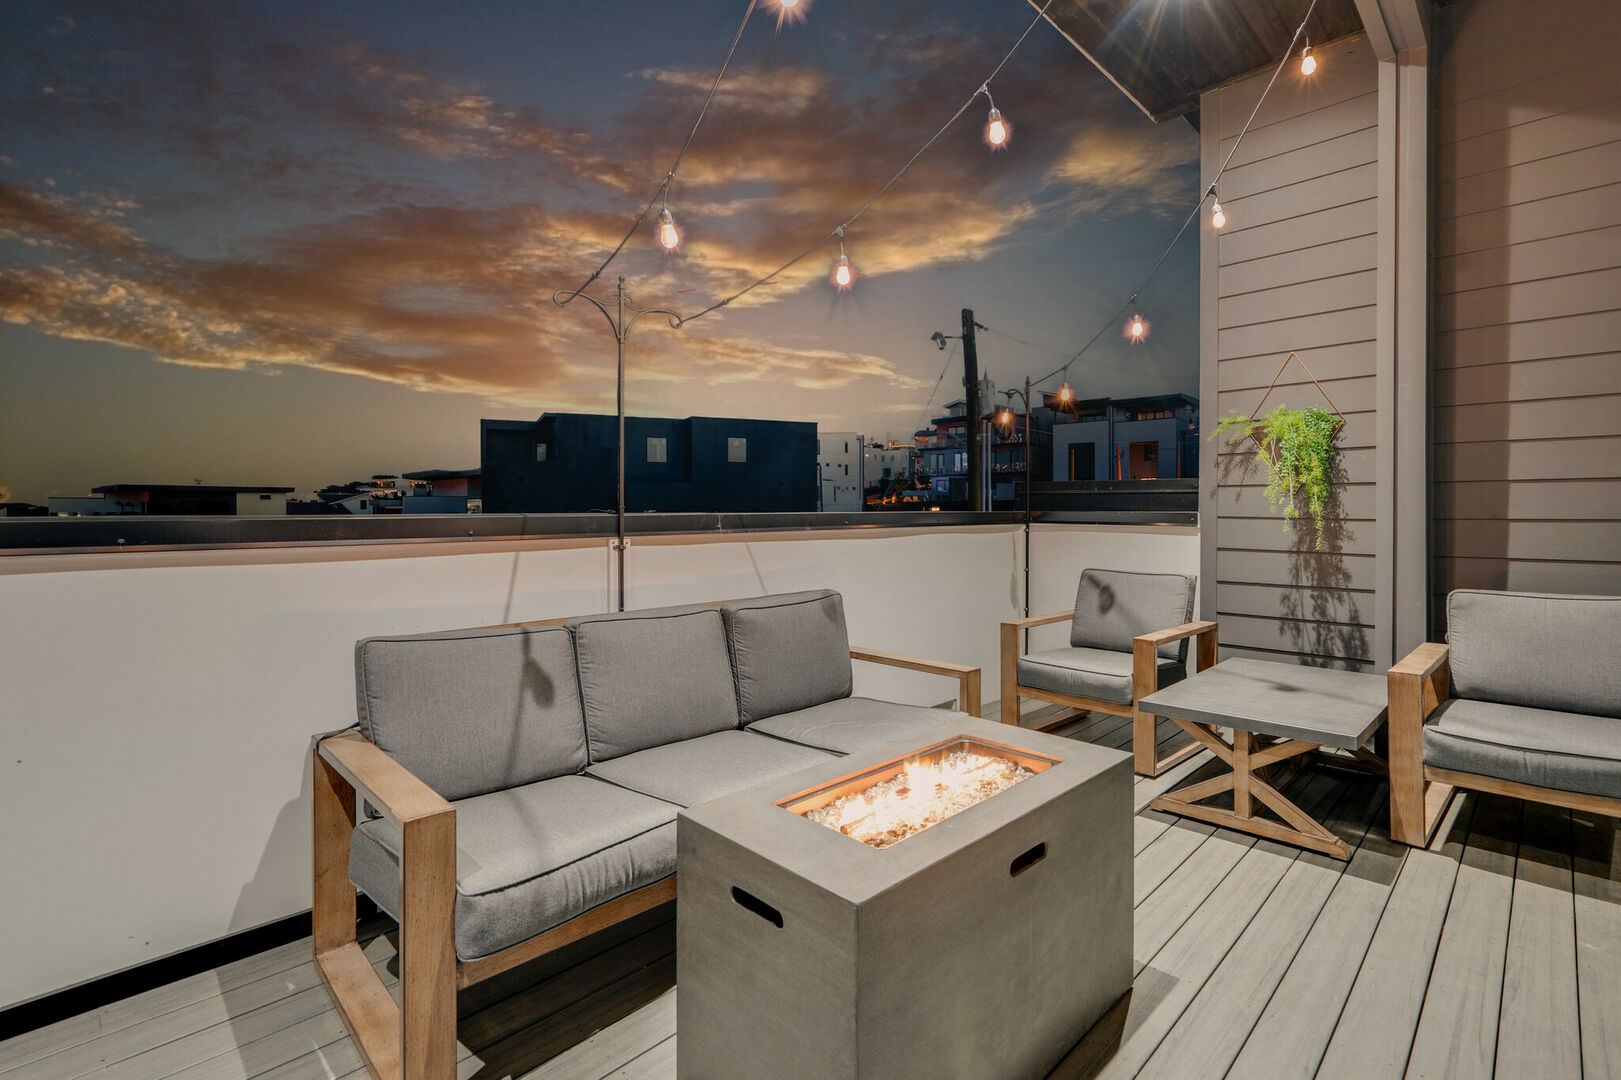 2nd unit: Rooftop patio with fire pit, outdoor bbq grill and lounge area draped in bistro lights.